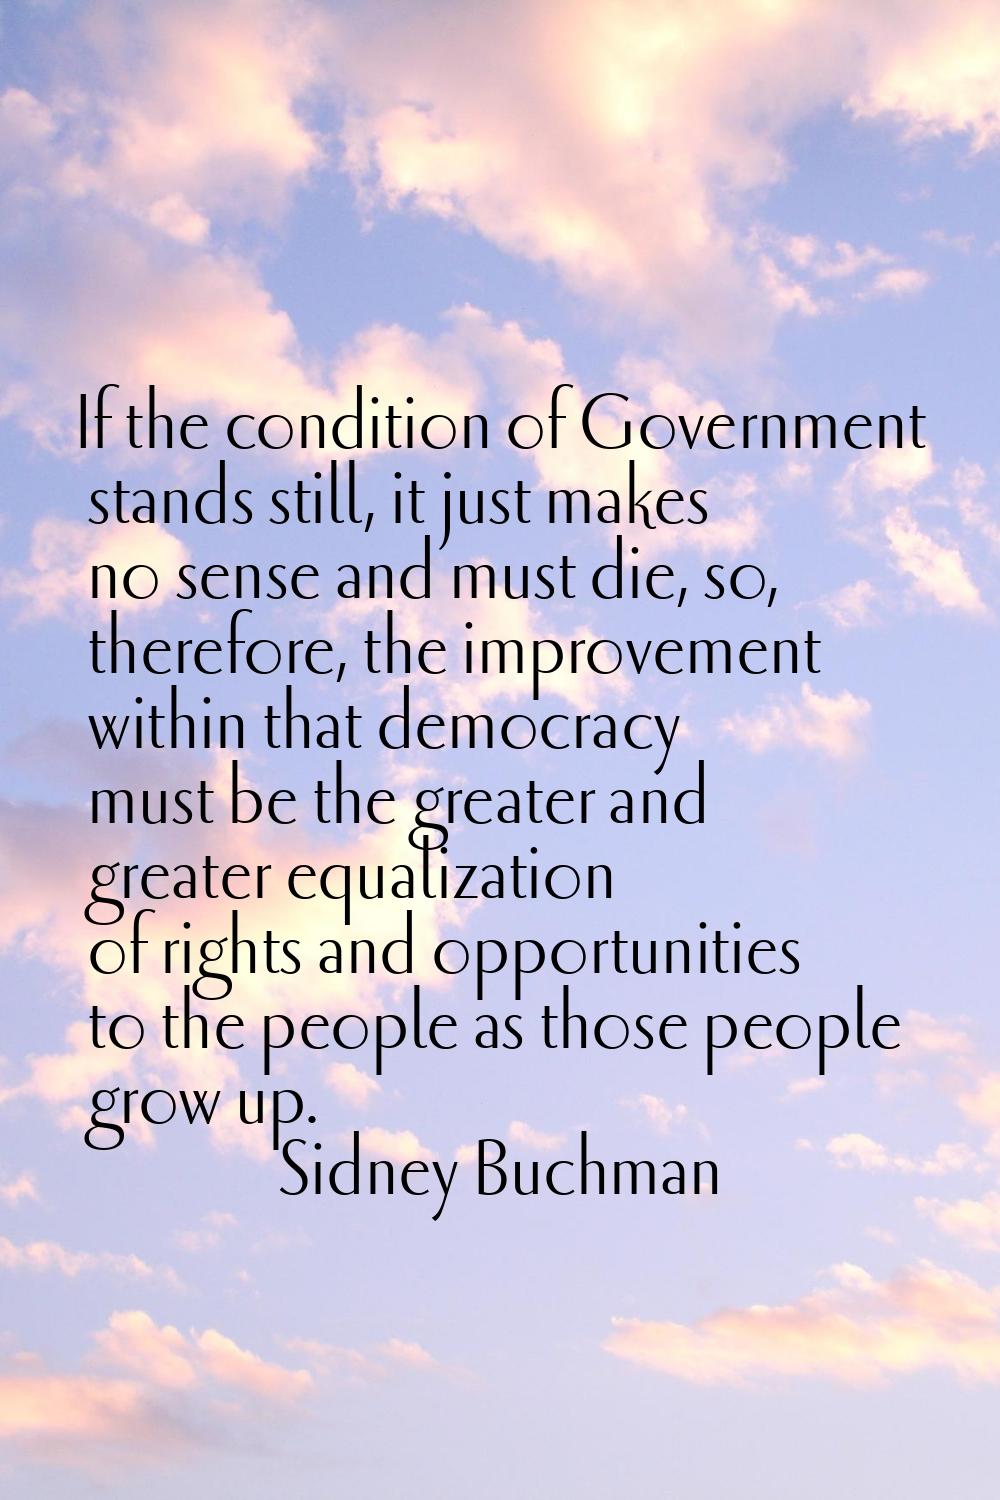 If the condition of Government stands still, it just makes no sense and must die, so, therefore, th